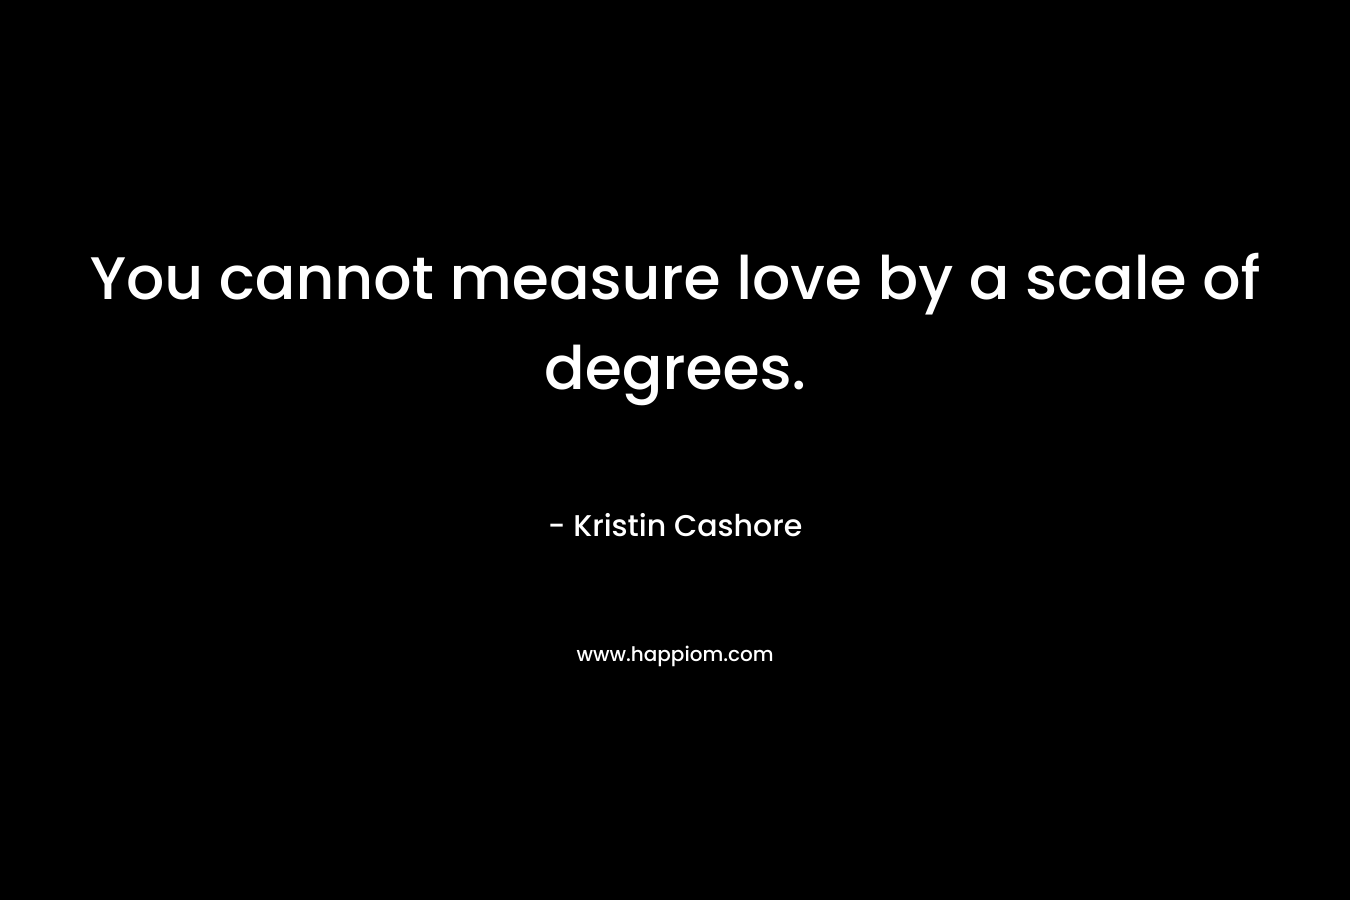 You cannot measure love by a scale of degrees.